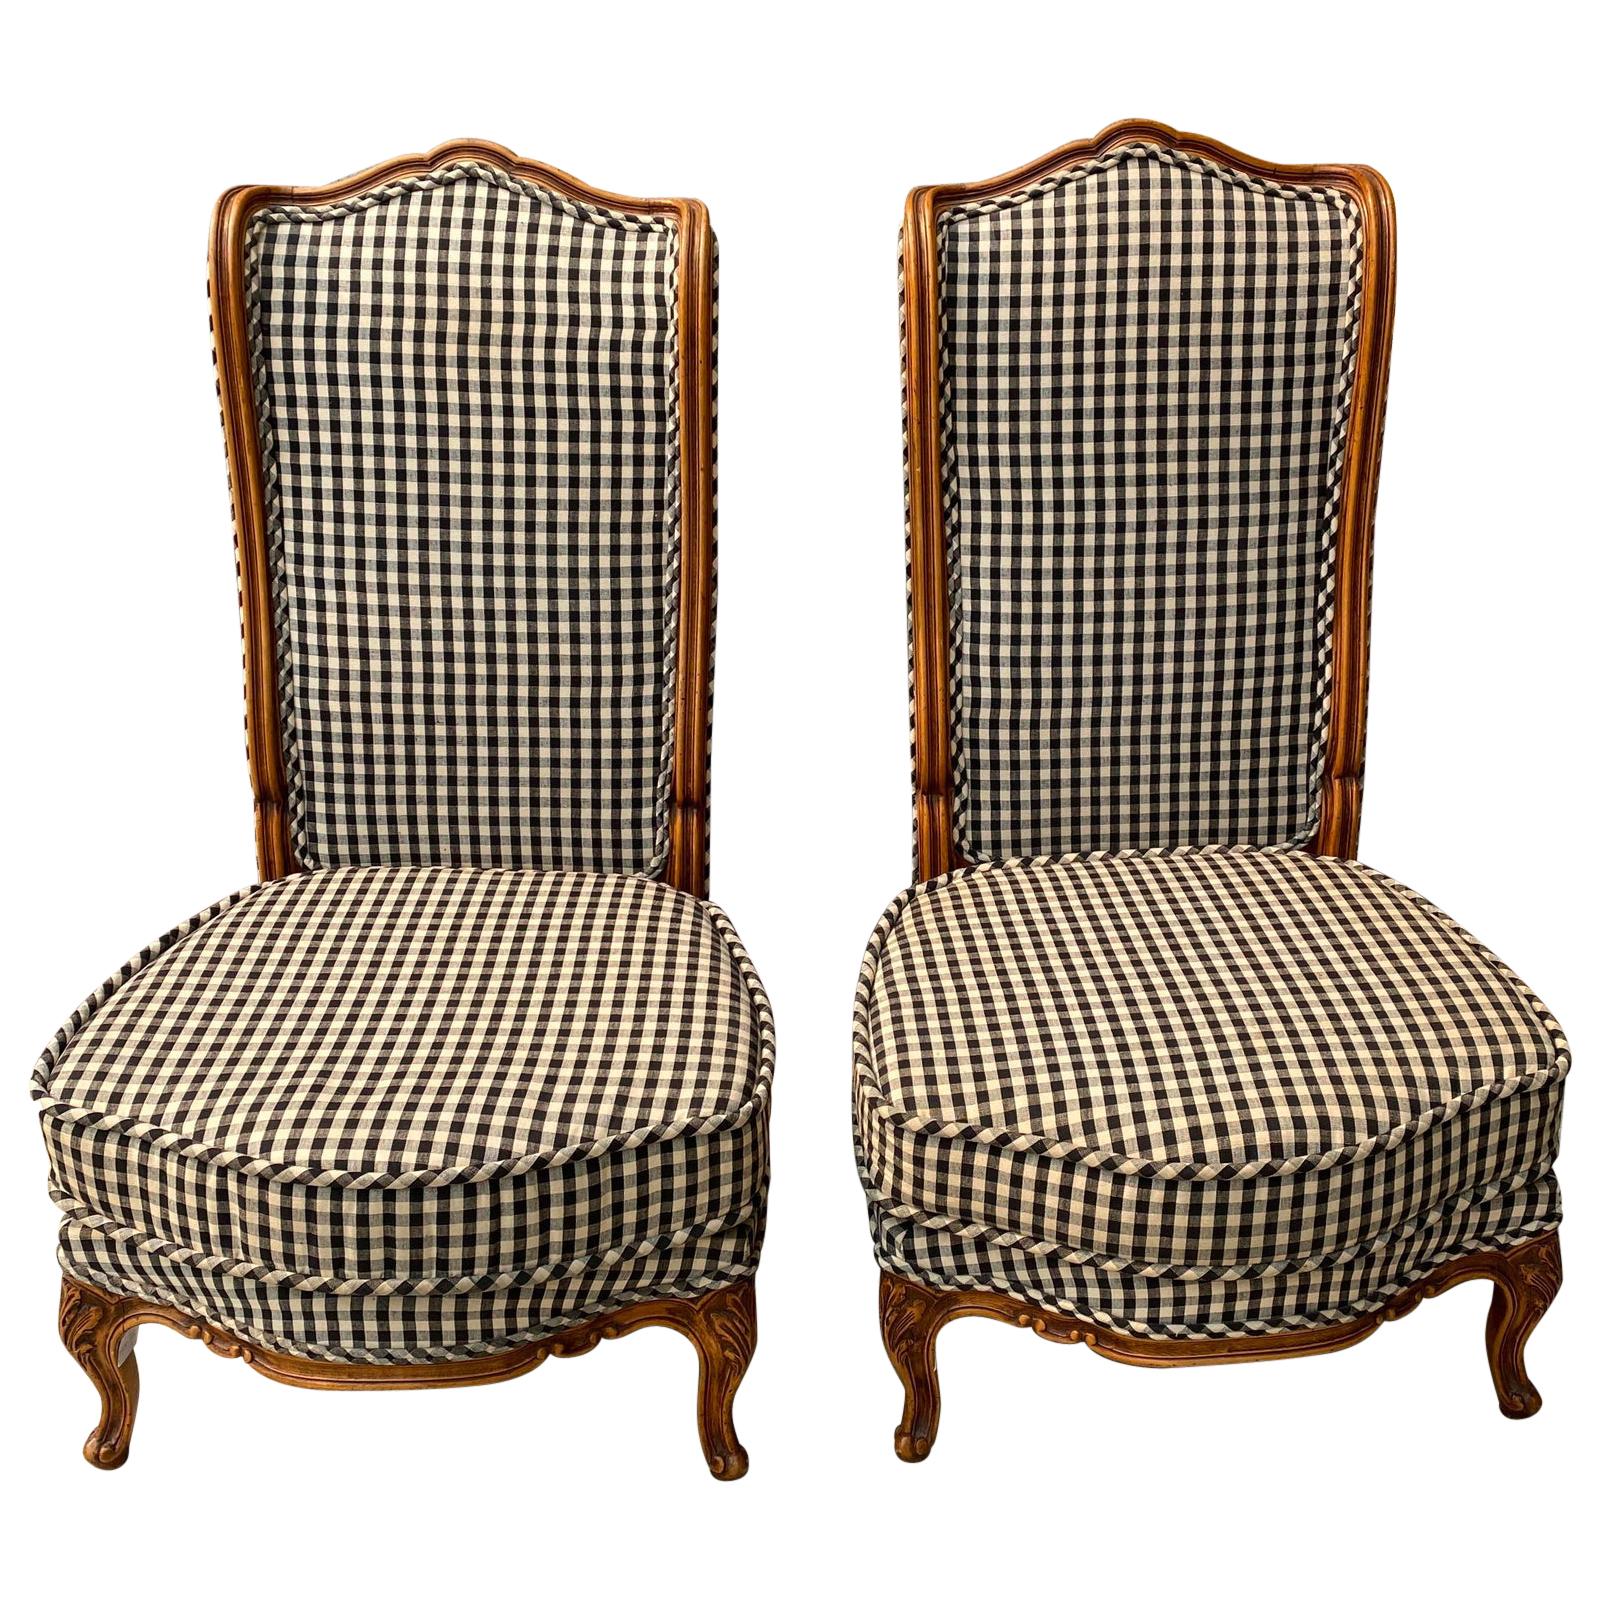 Pair of Mid-20th Century Carved Walnut and Upholstered High Back Chairs